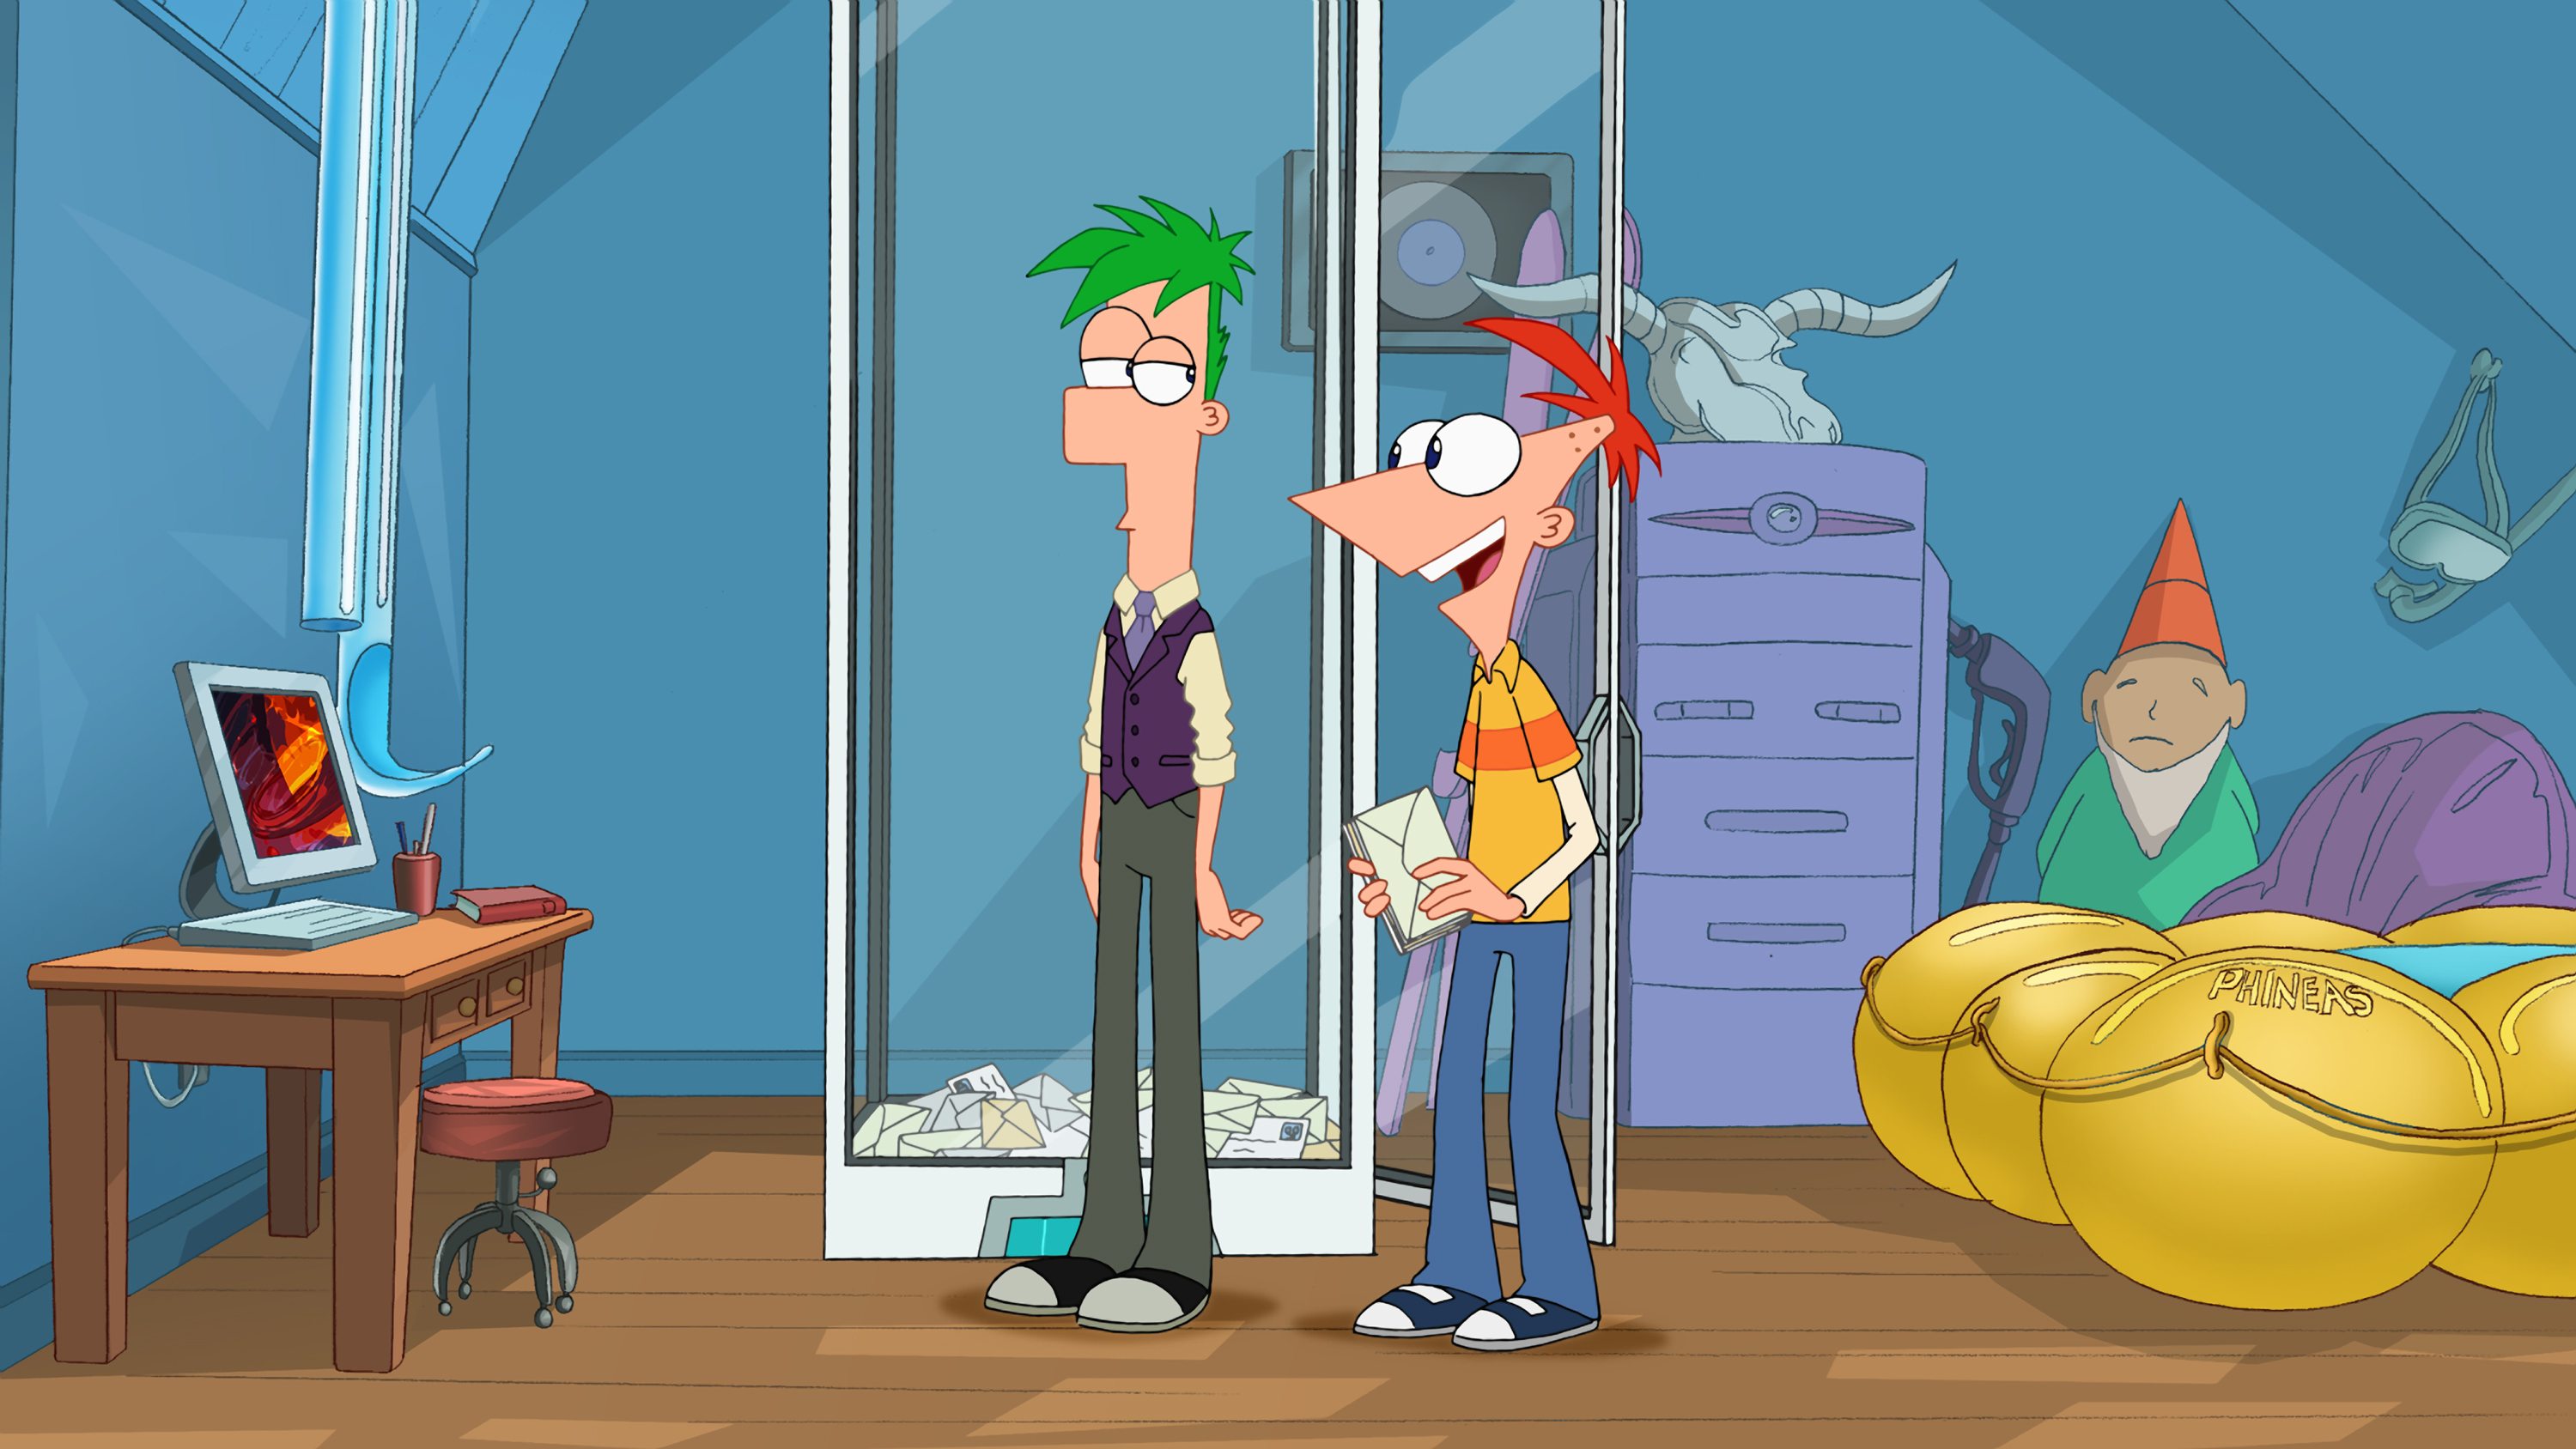 Tonight 'Phineas and Ferb' Gives Us a Peek at the Kids' Teen Years